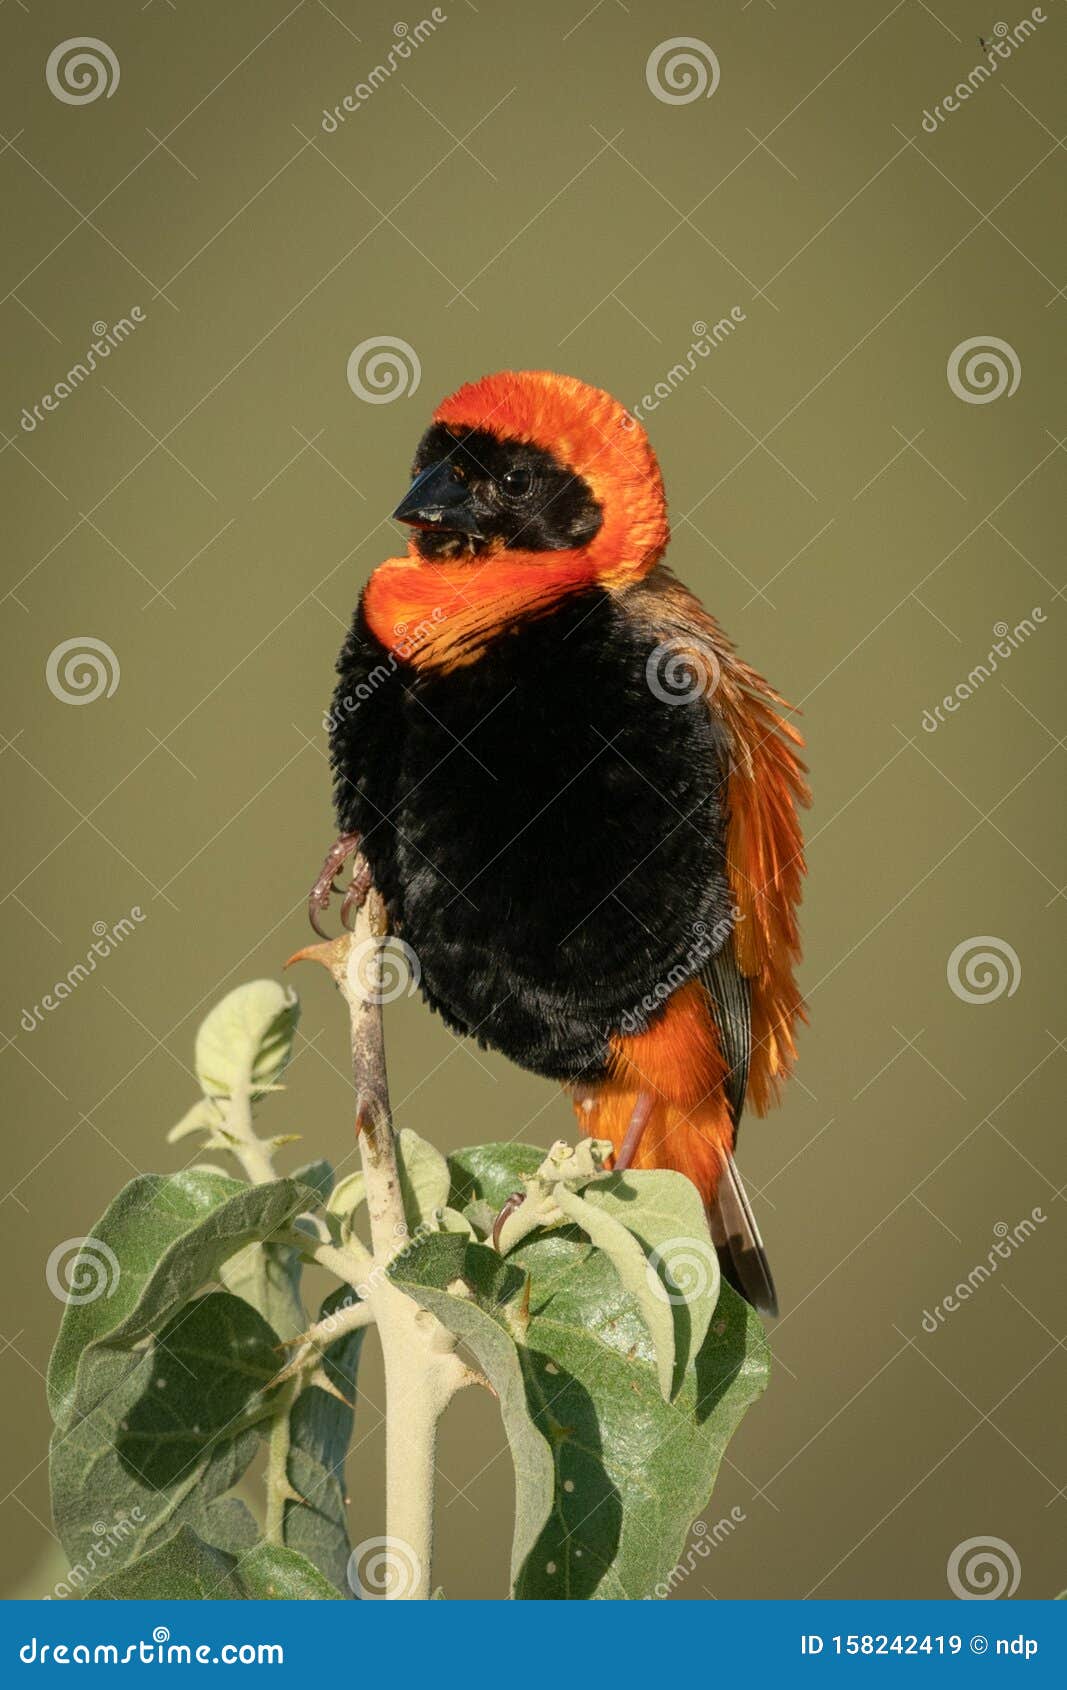 black-winged red bishop on bush with catchlight